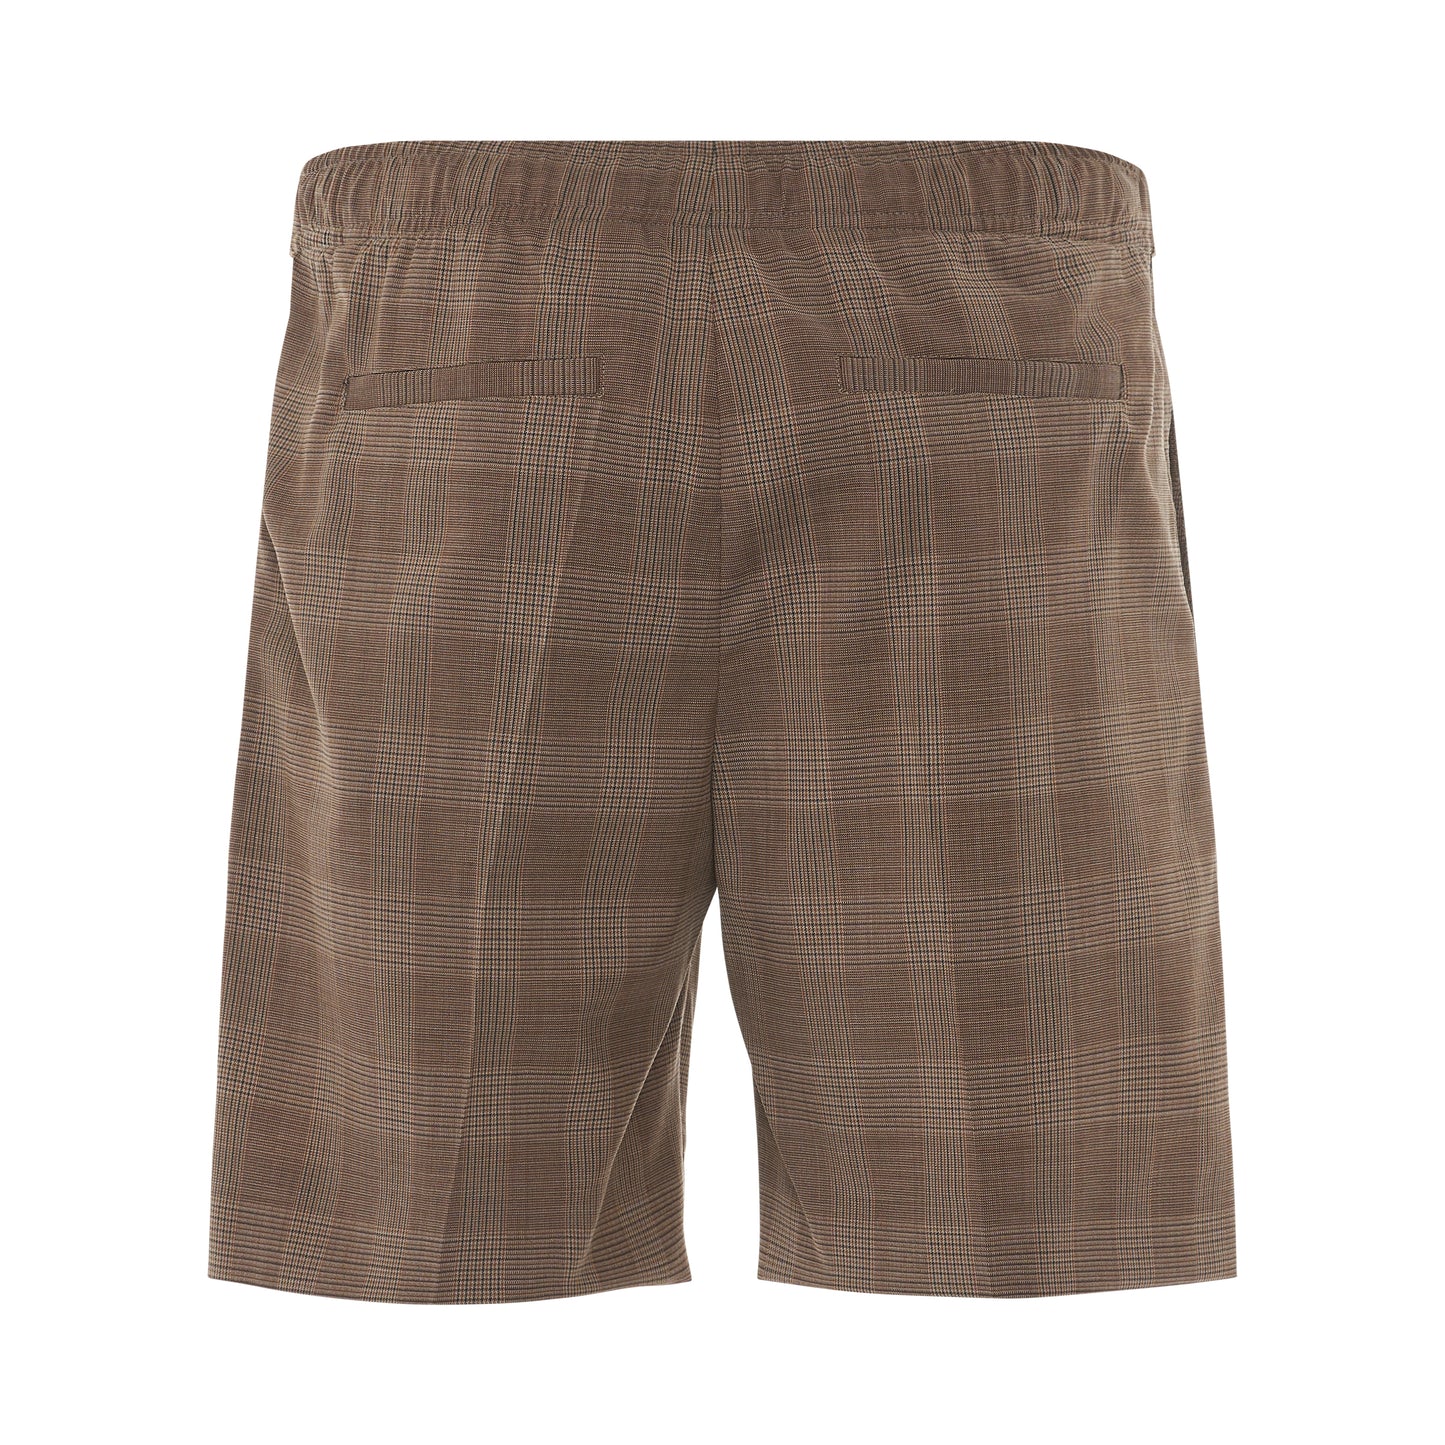 Classic Fit Woven Shorts in Light Brown